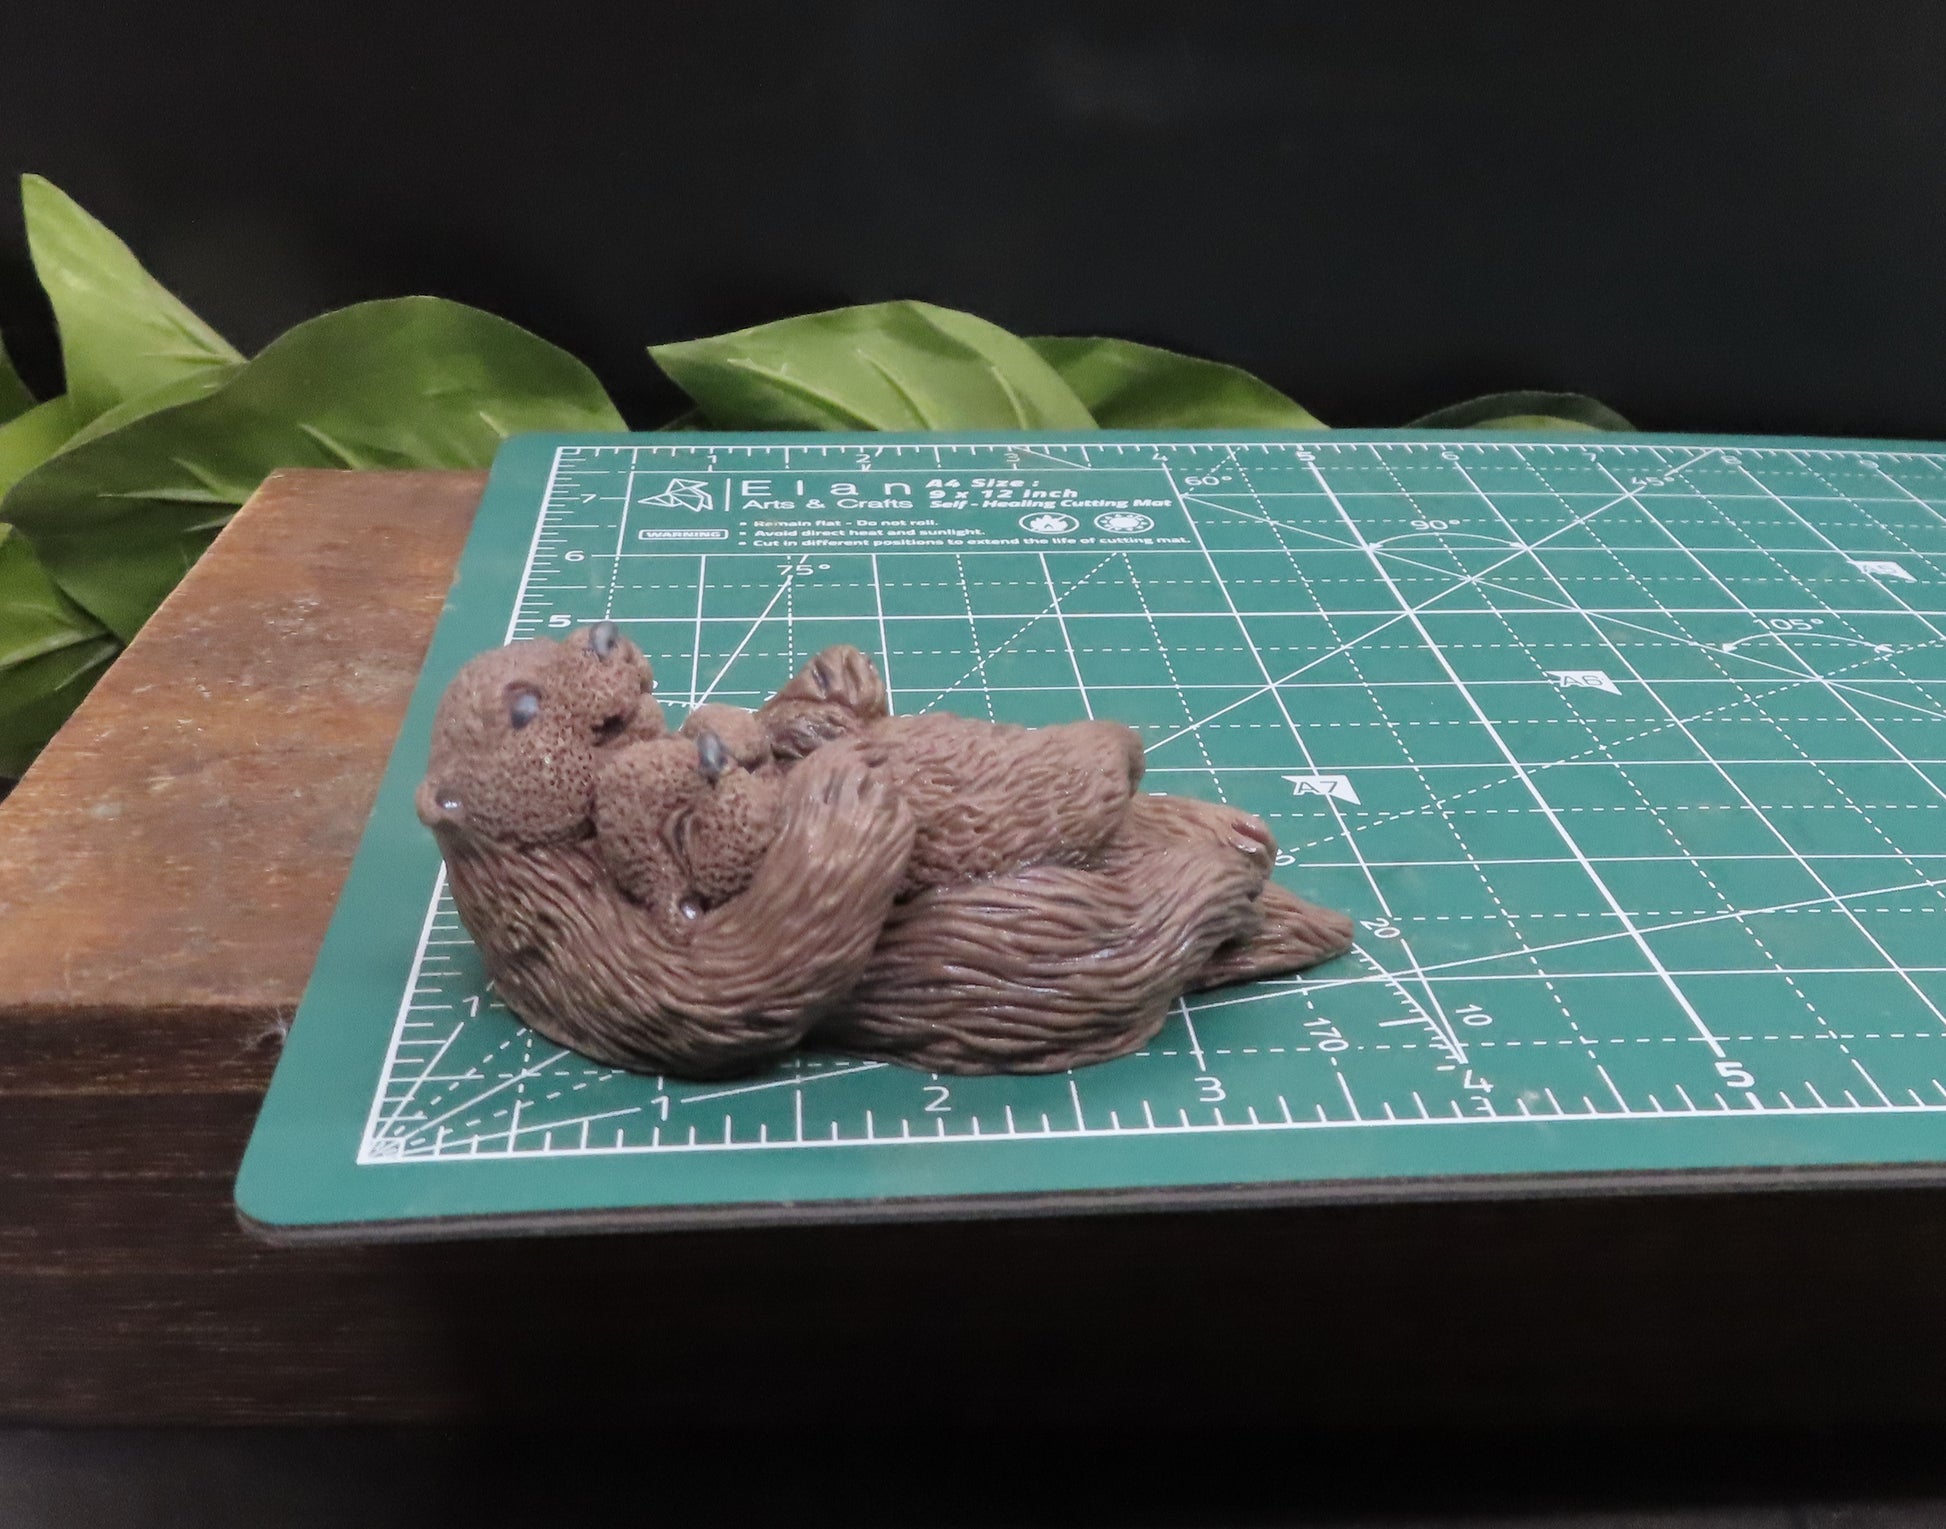 Otter soap measures 3.5 inches long